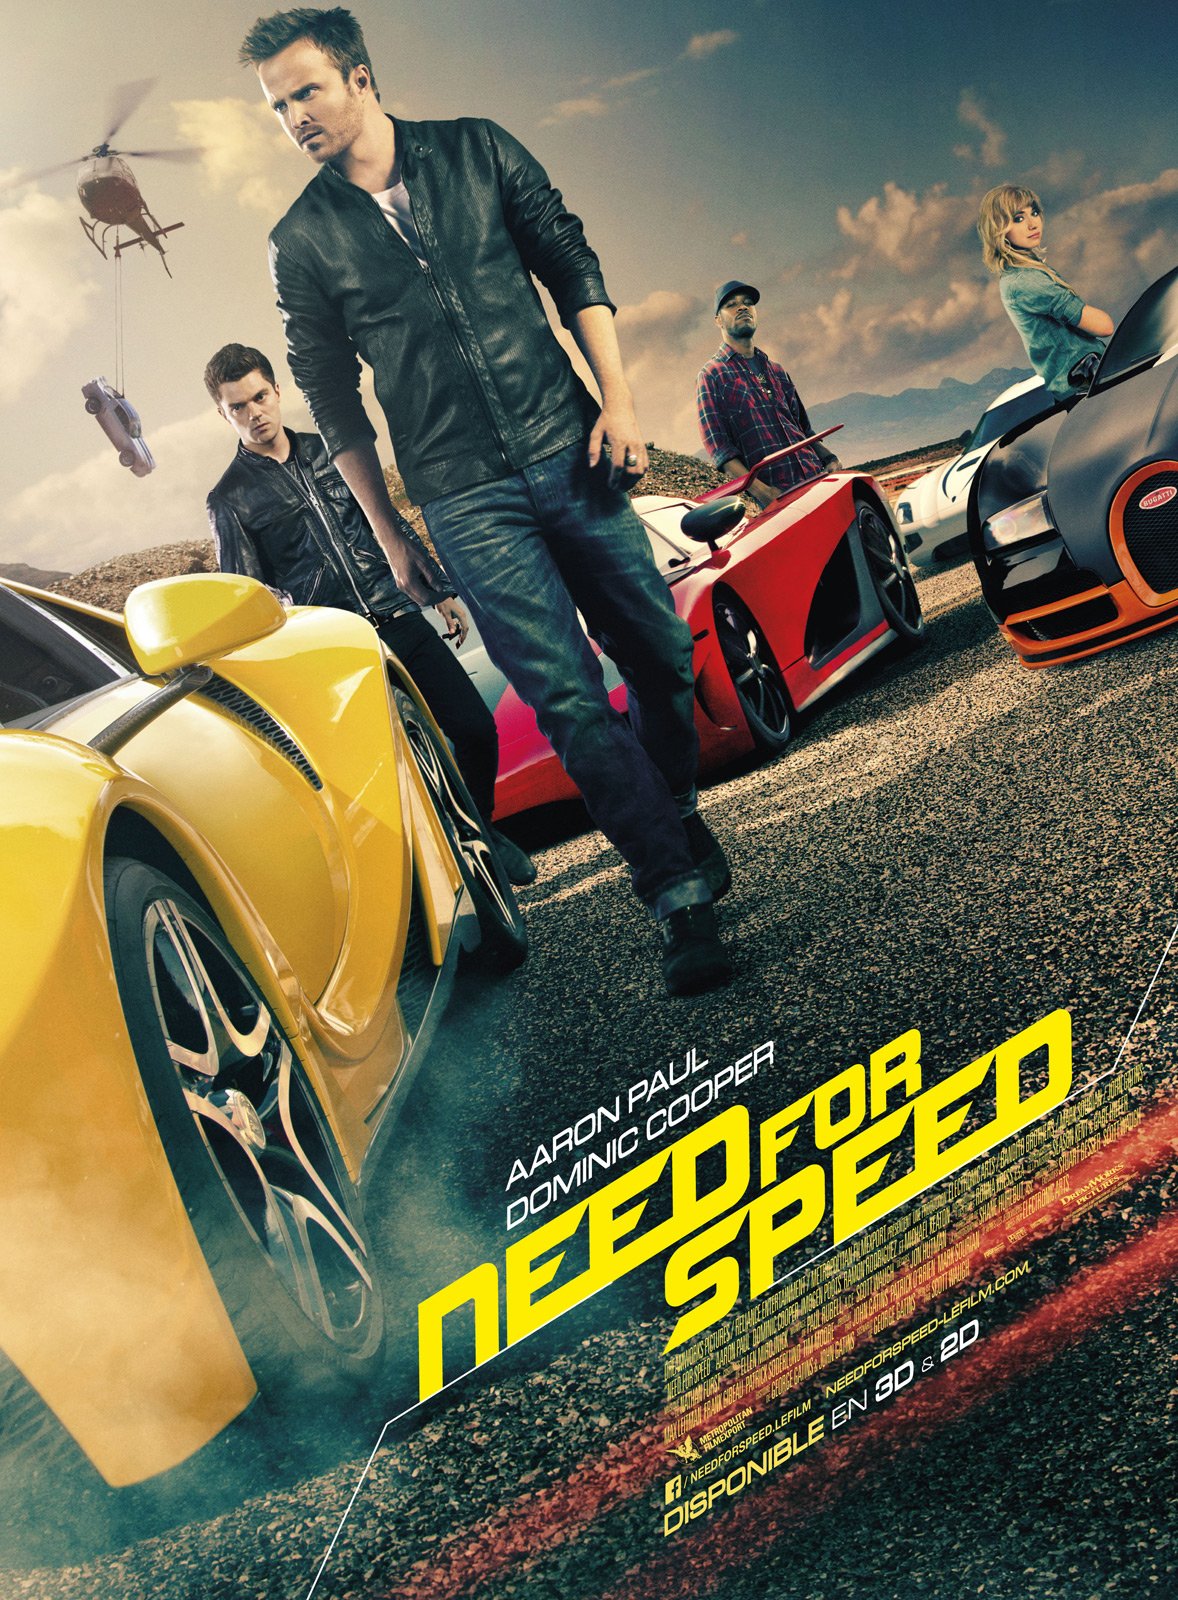 Need for Speed - Cast & Director Interviews 